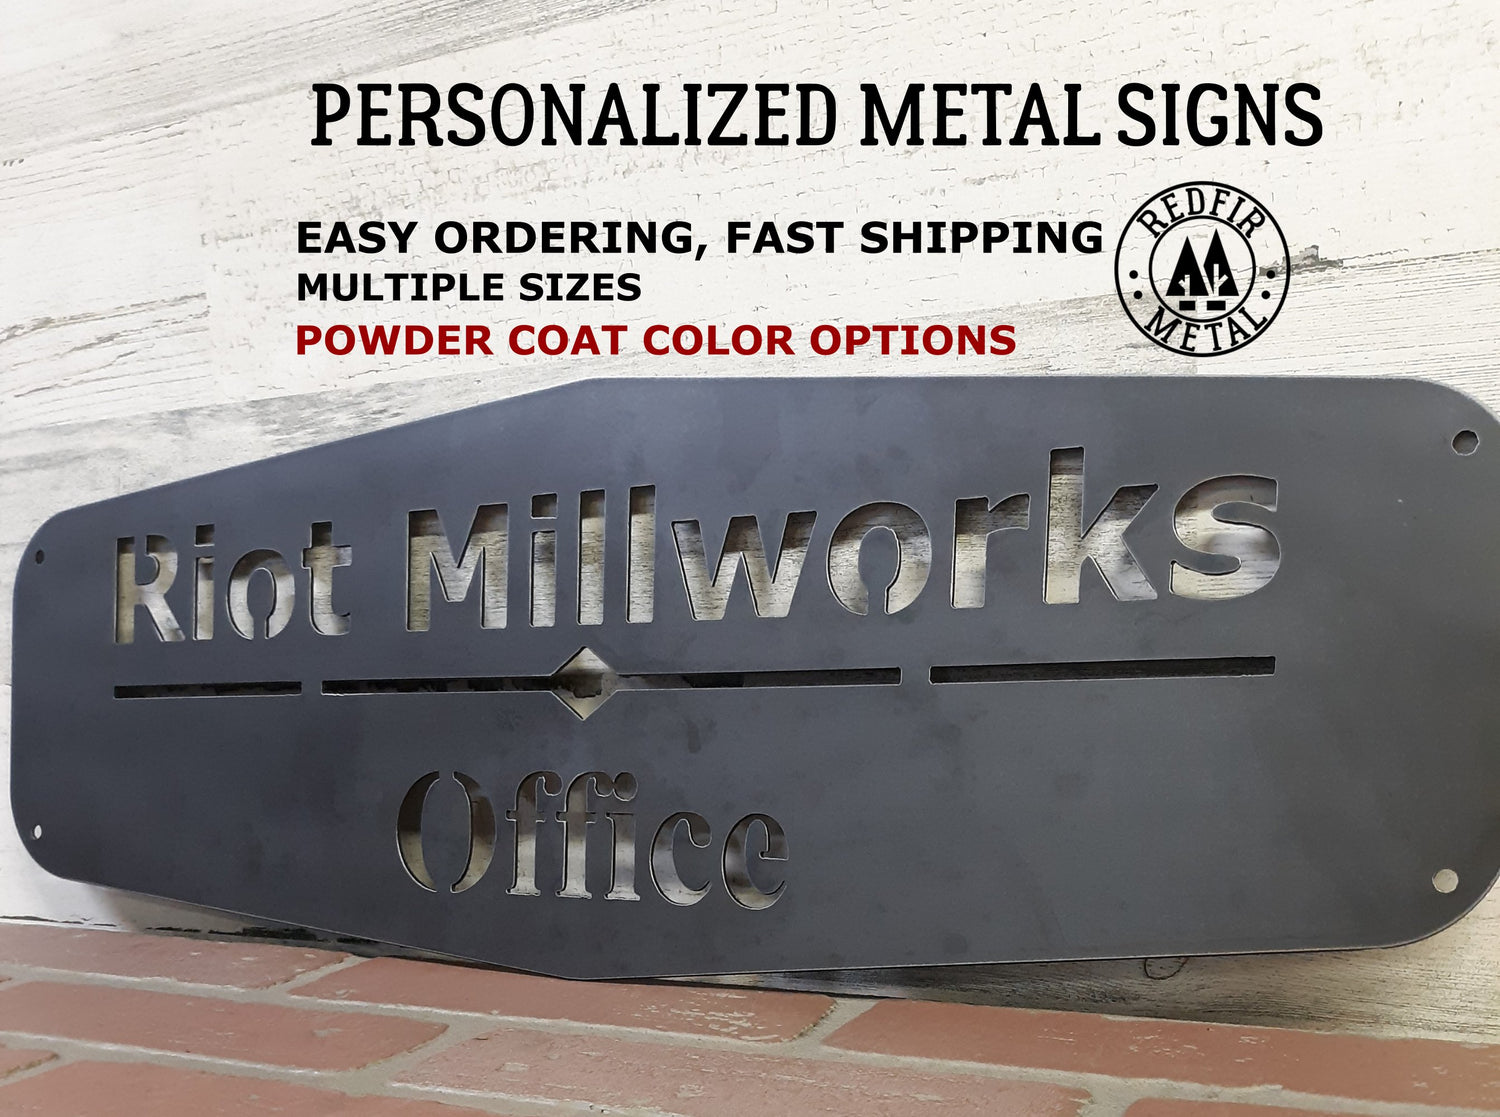 Personalized Metal Signs